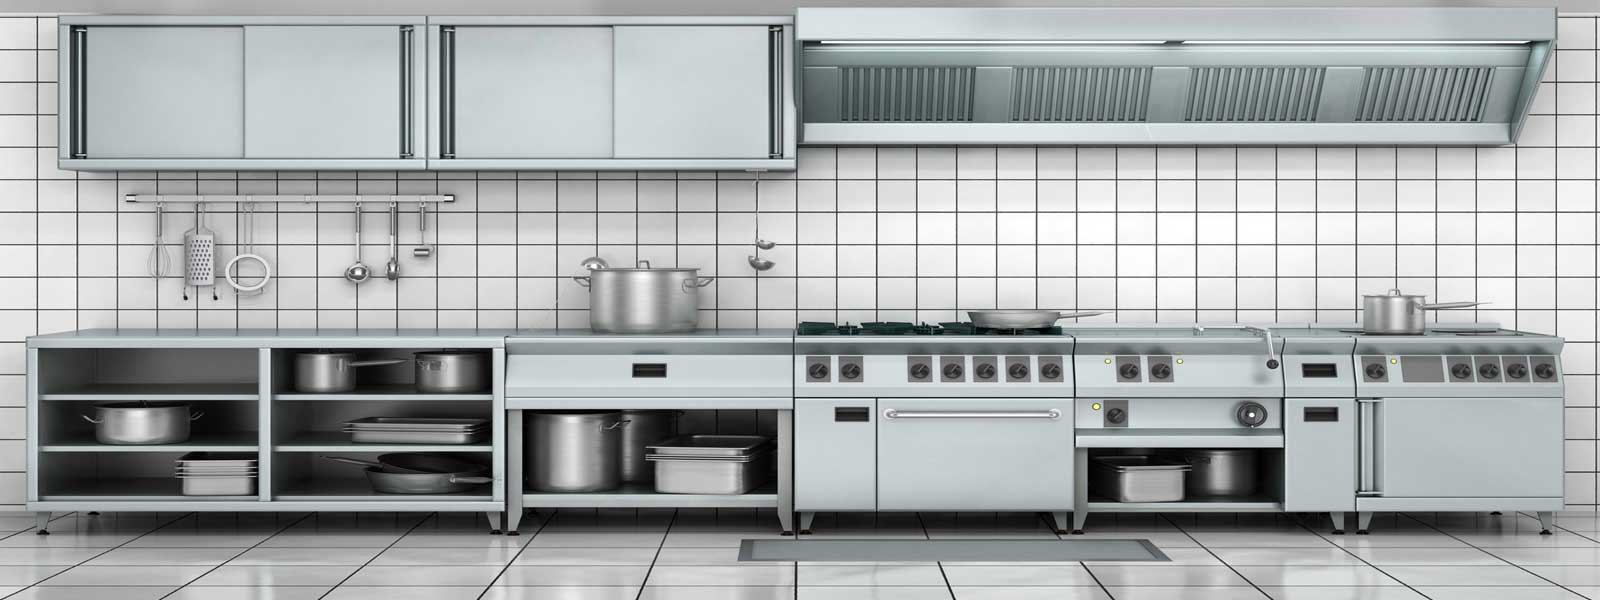 Canteen Kitchen Equipment Manufacturers in Bangalore